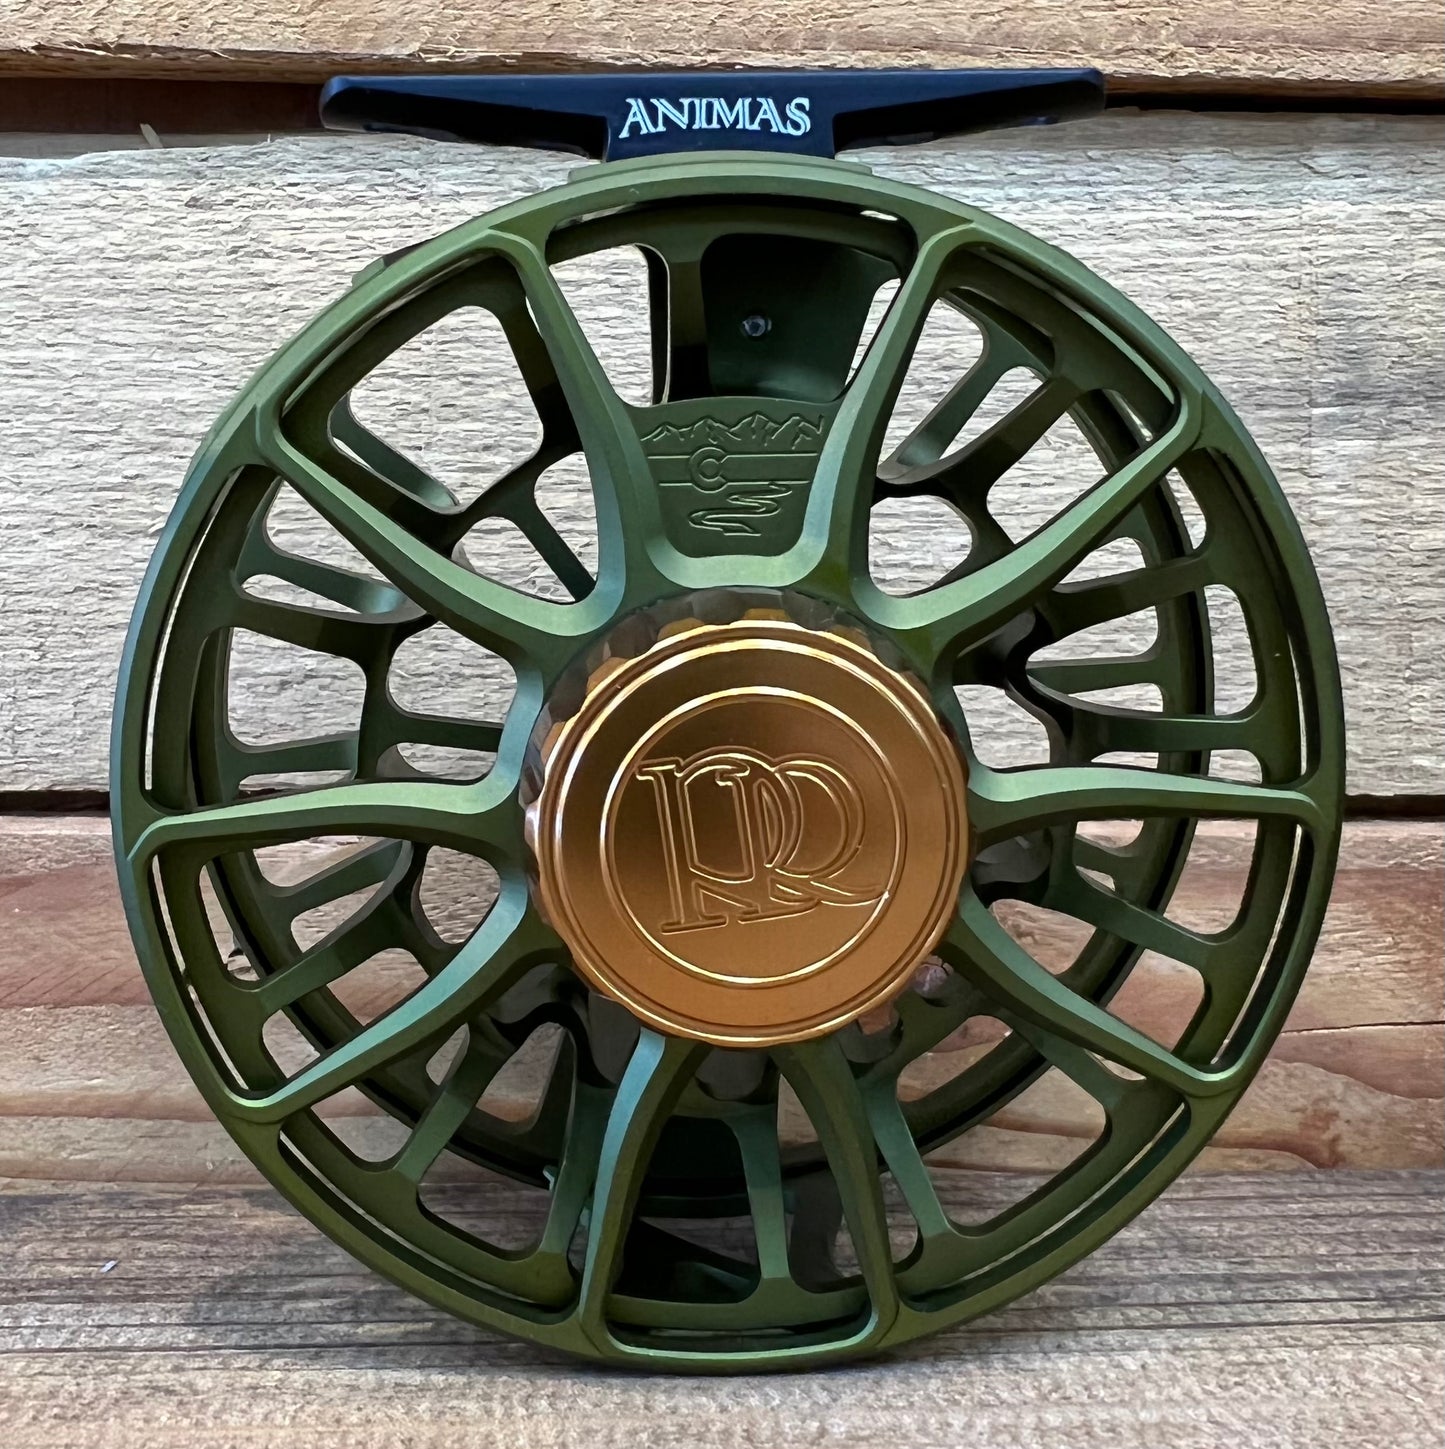 Ross Animas Fly Reel - Matte Olive - Made in USA